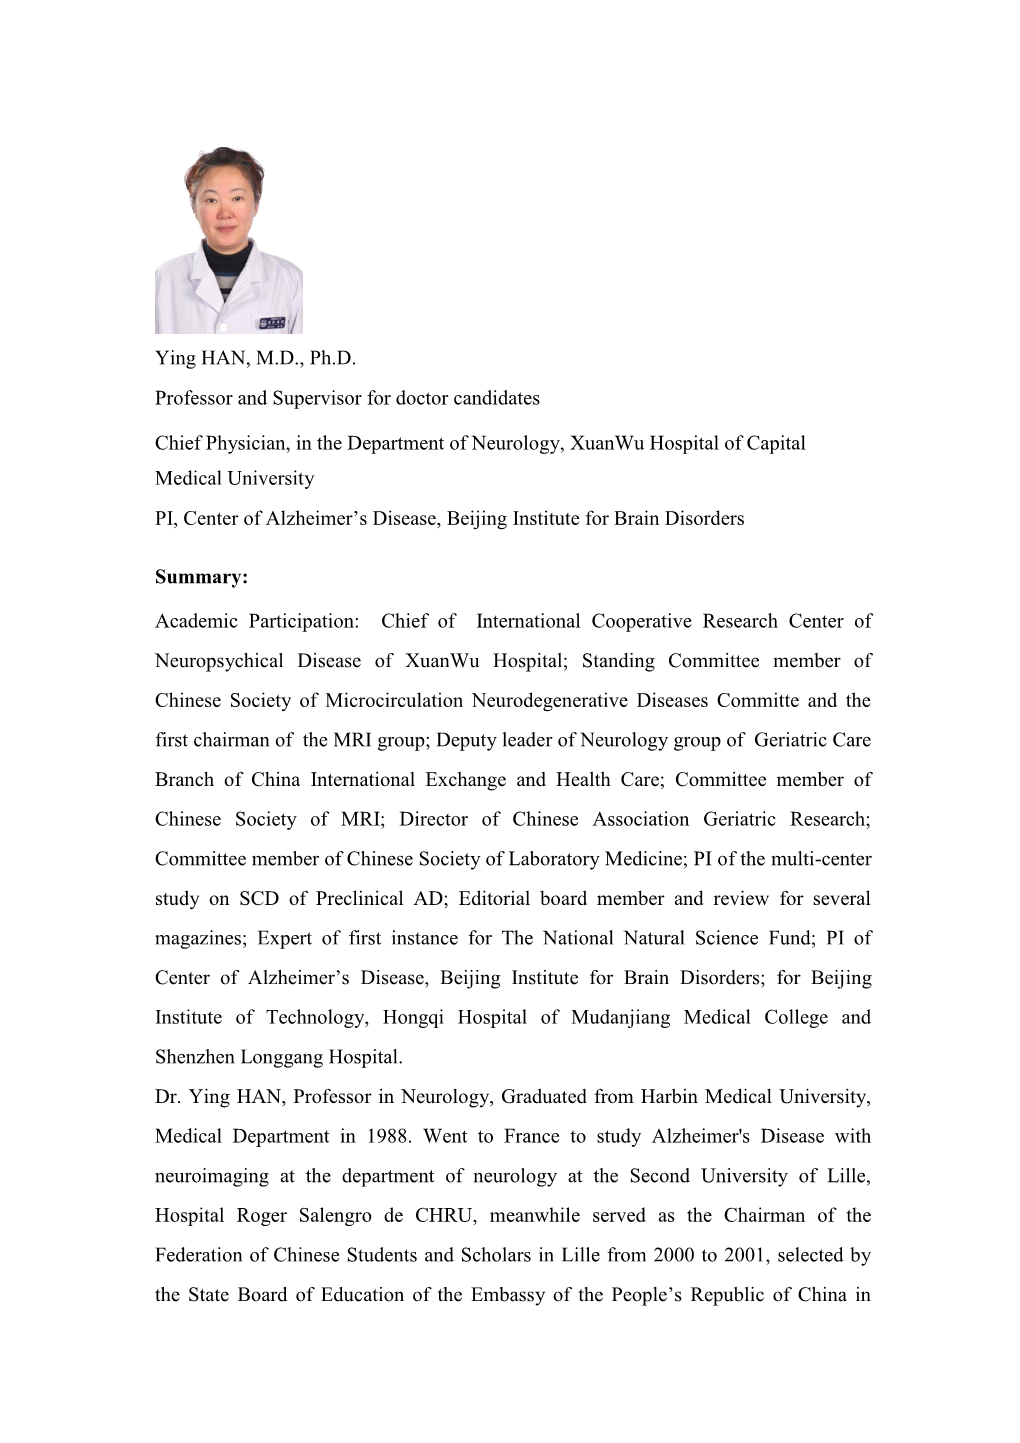 Ying HAN, M.D., Ph.D. Professor and Supervisor for Doctor Candidates